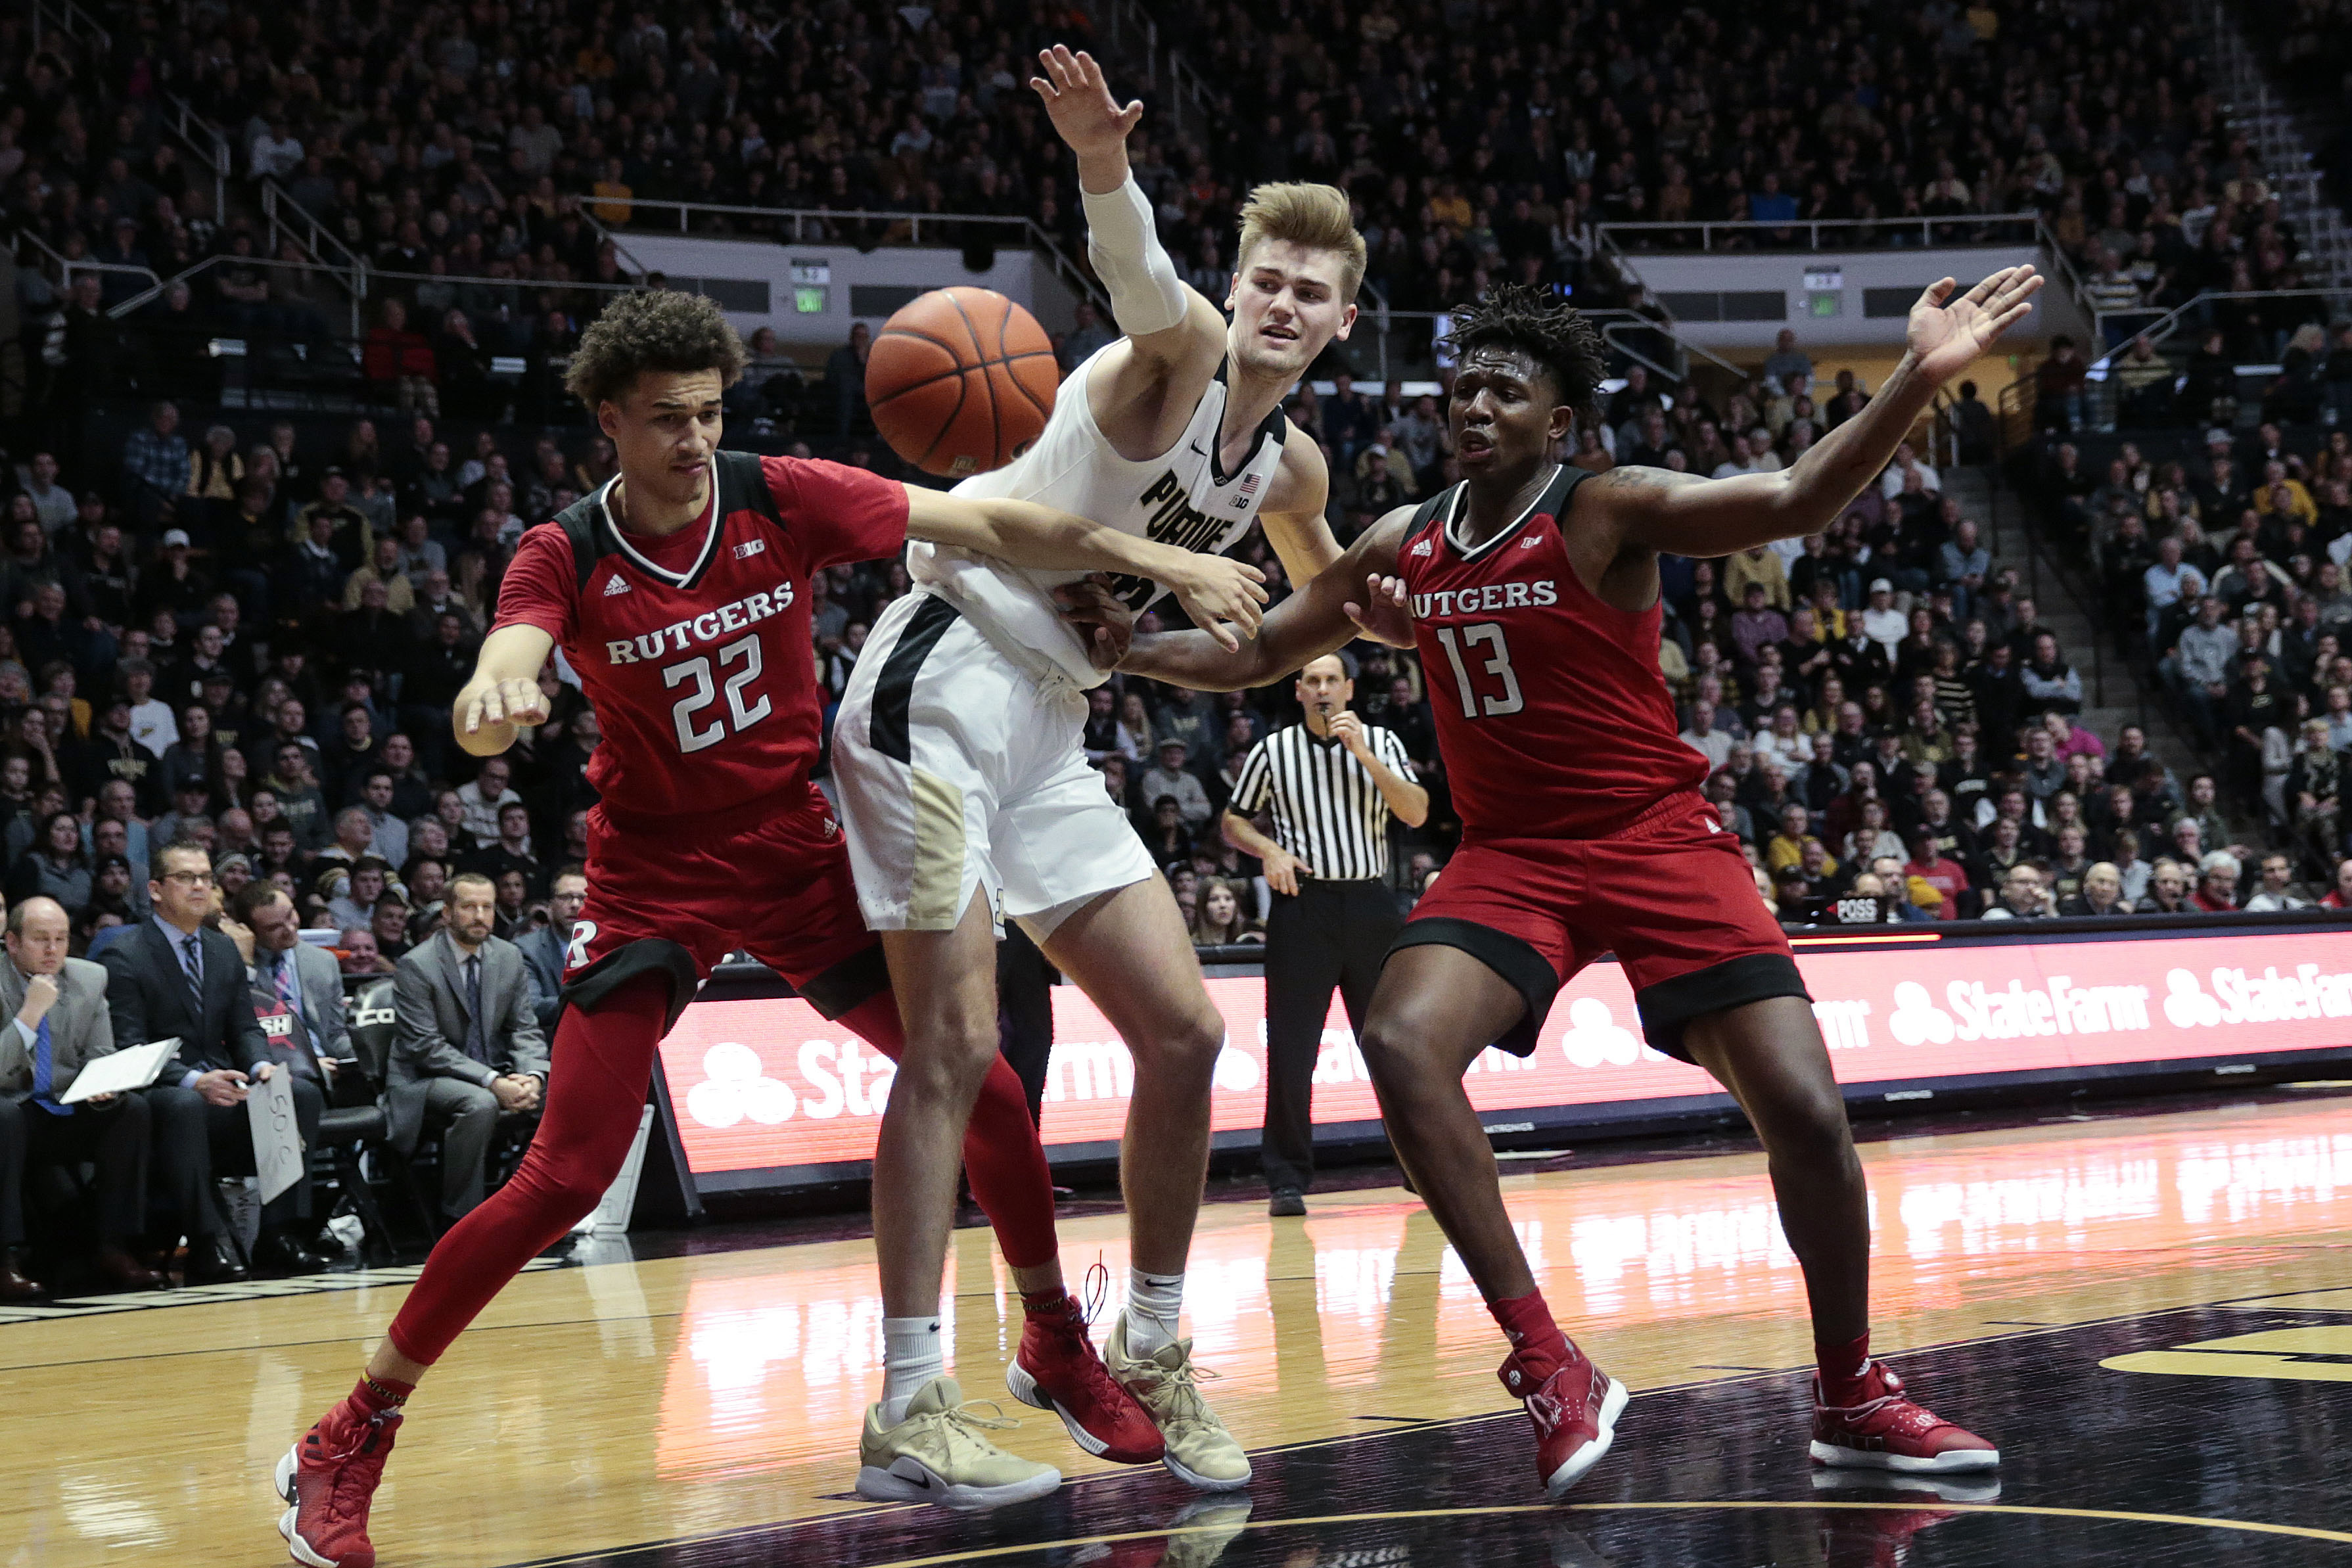 Edwards scores 19 points to lead Purdue over Rutgers 89-54